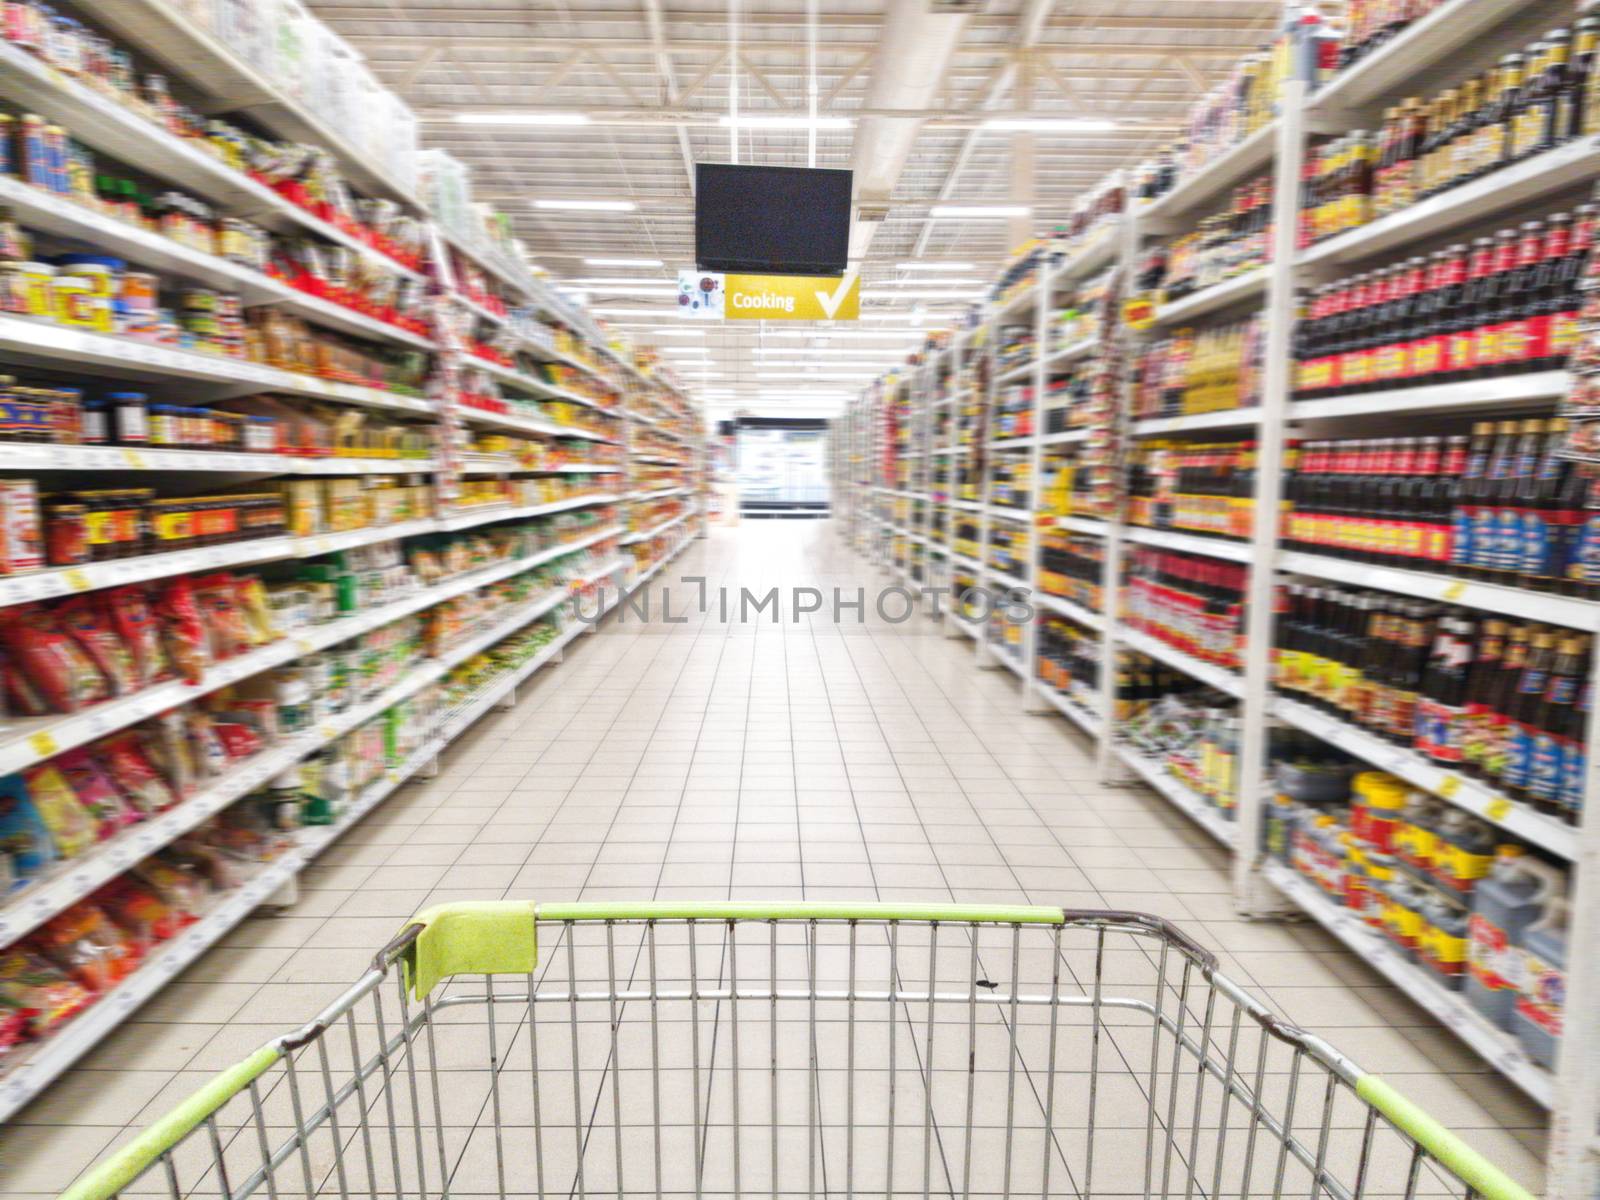 shopping cart with abstract blurred supermarket aisle with colorful goods on shelves at background, sign of product for cooking hanging from ceiling